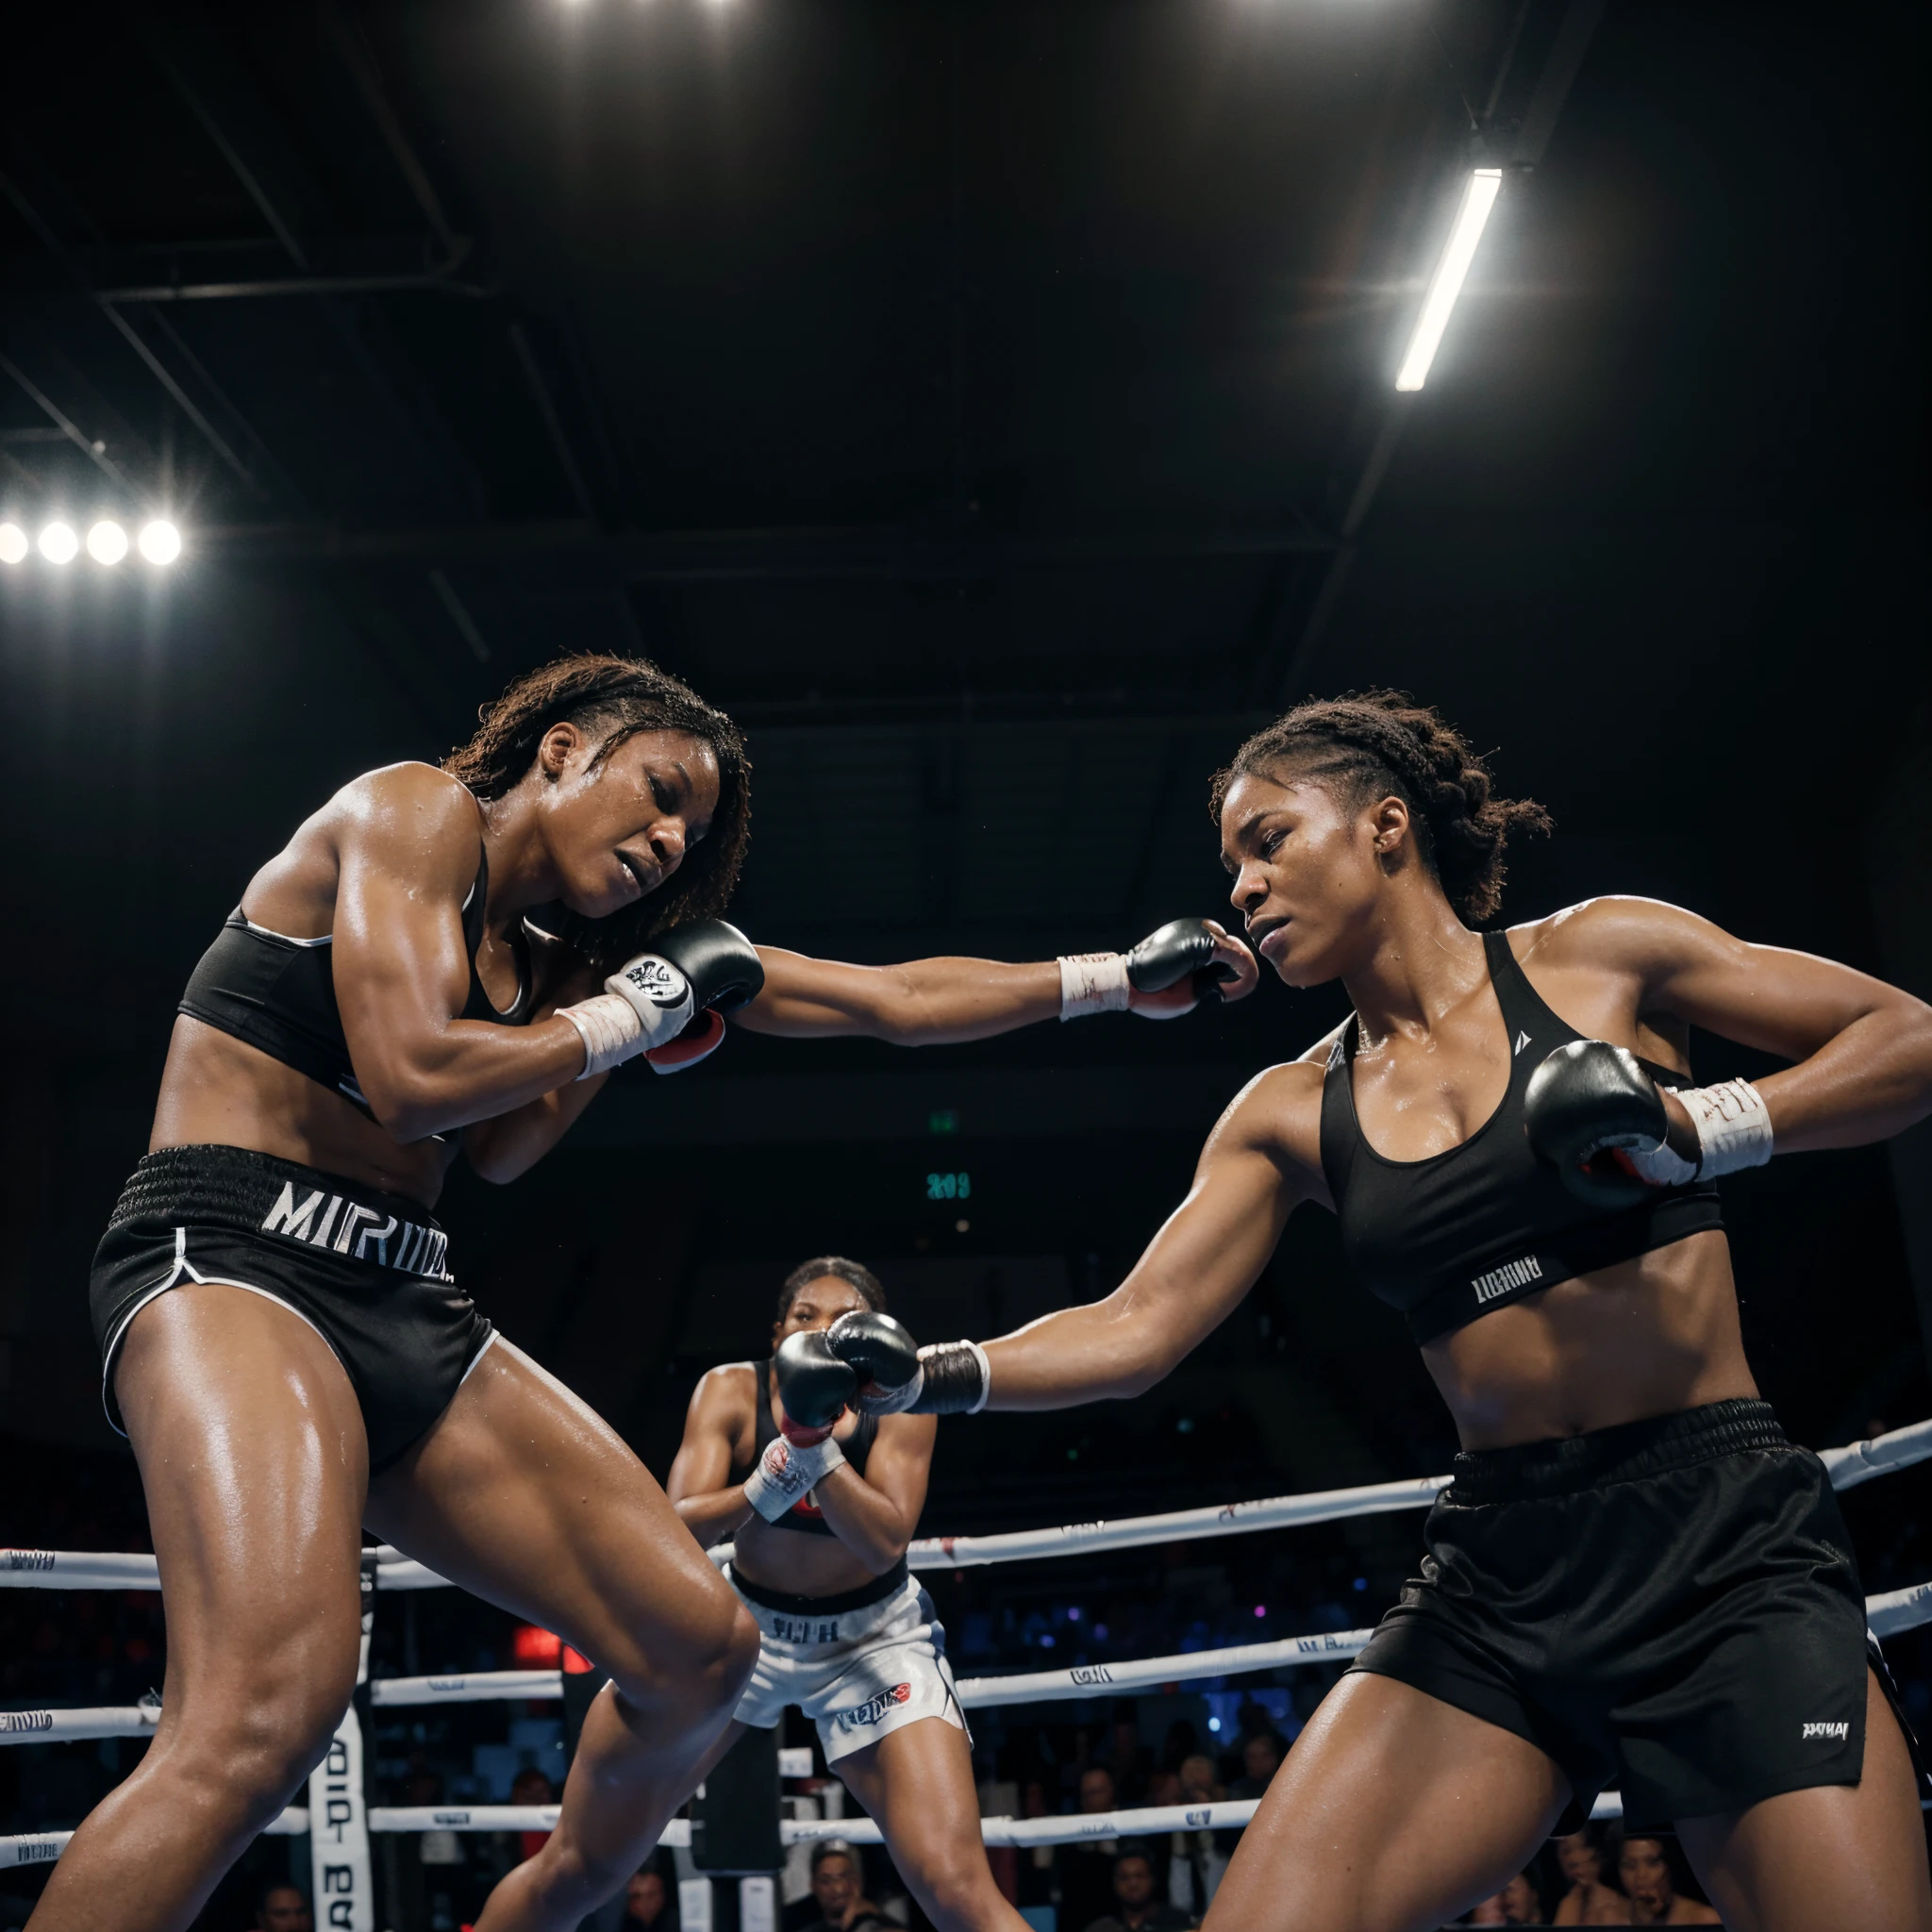 Two Black women boxers fighting in the boxing ring, fierce and